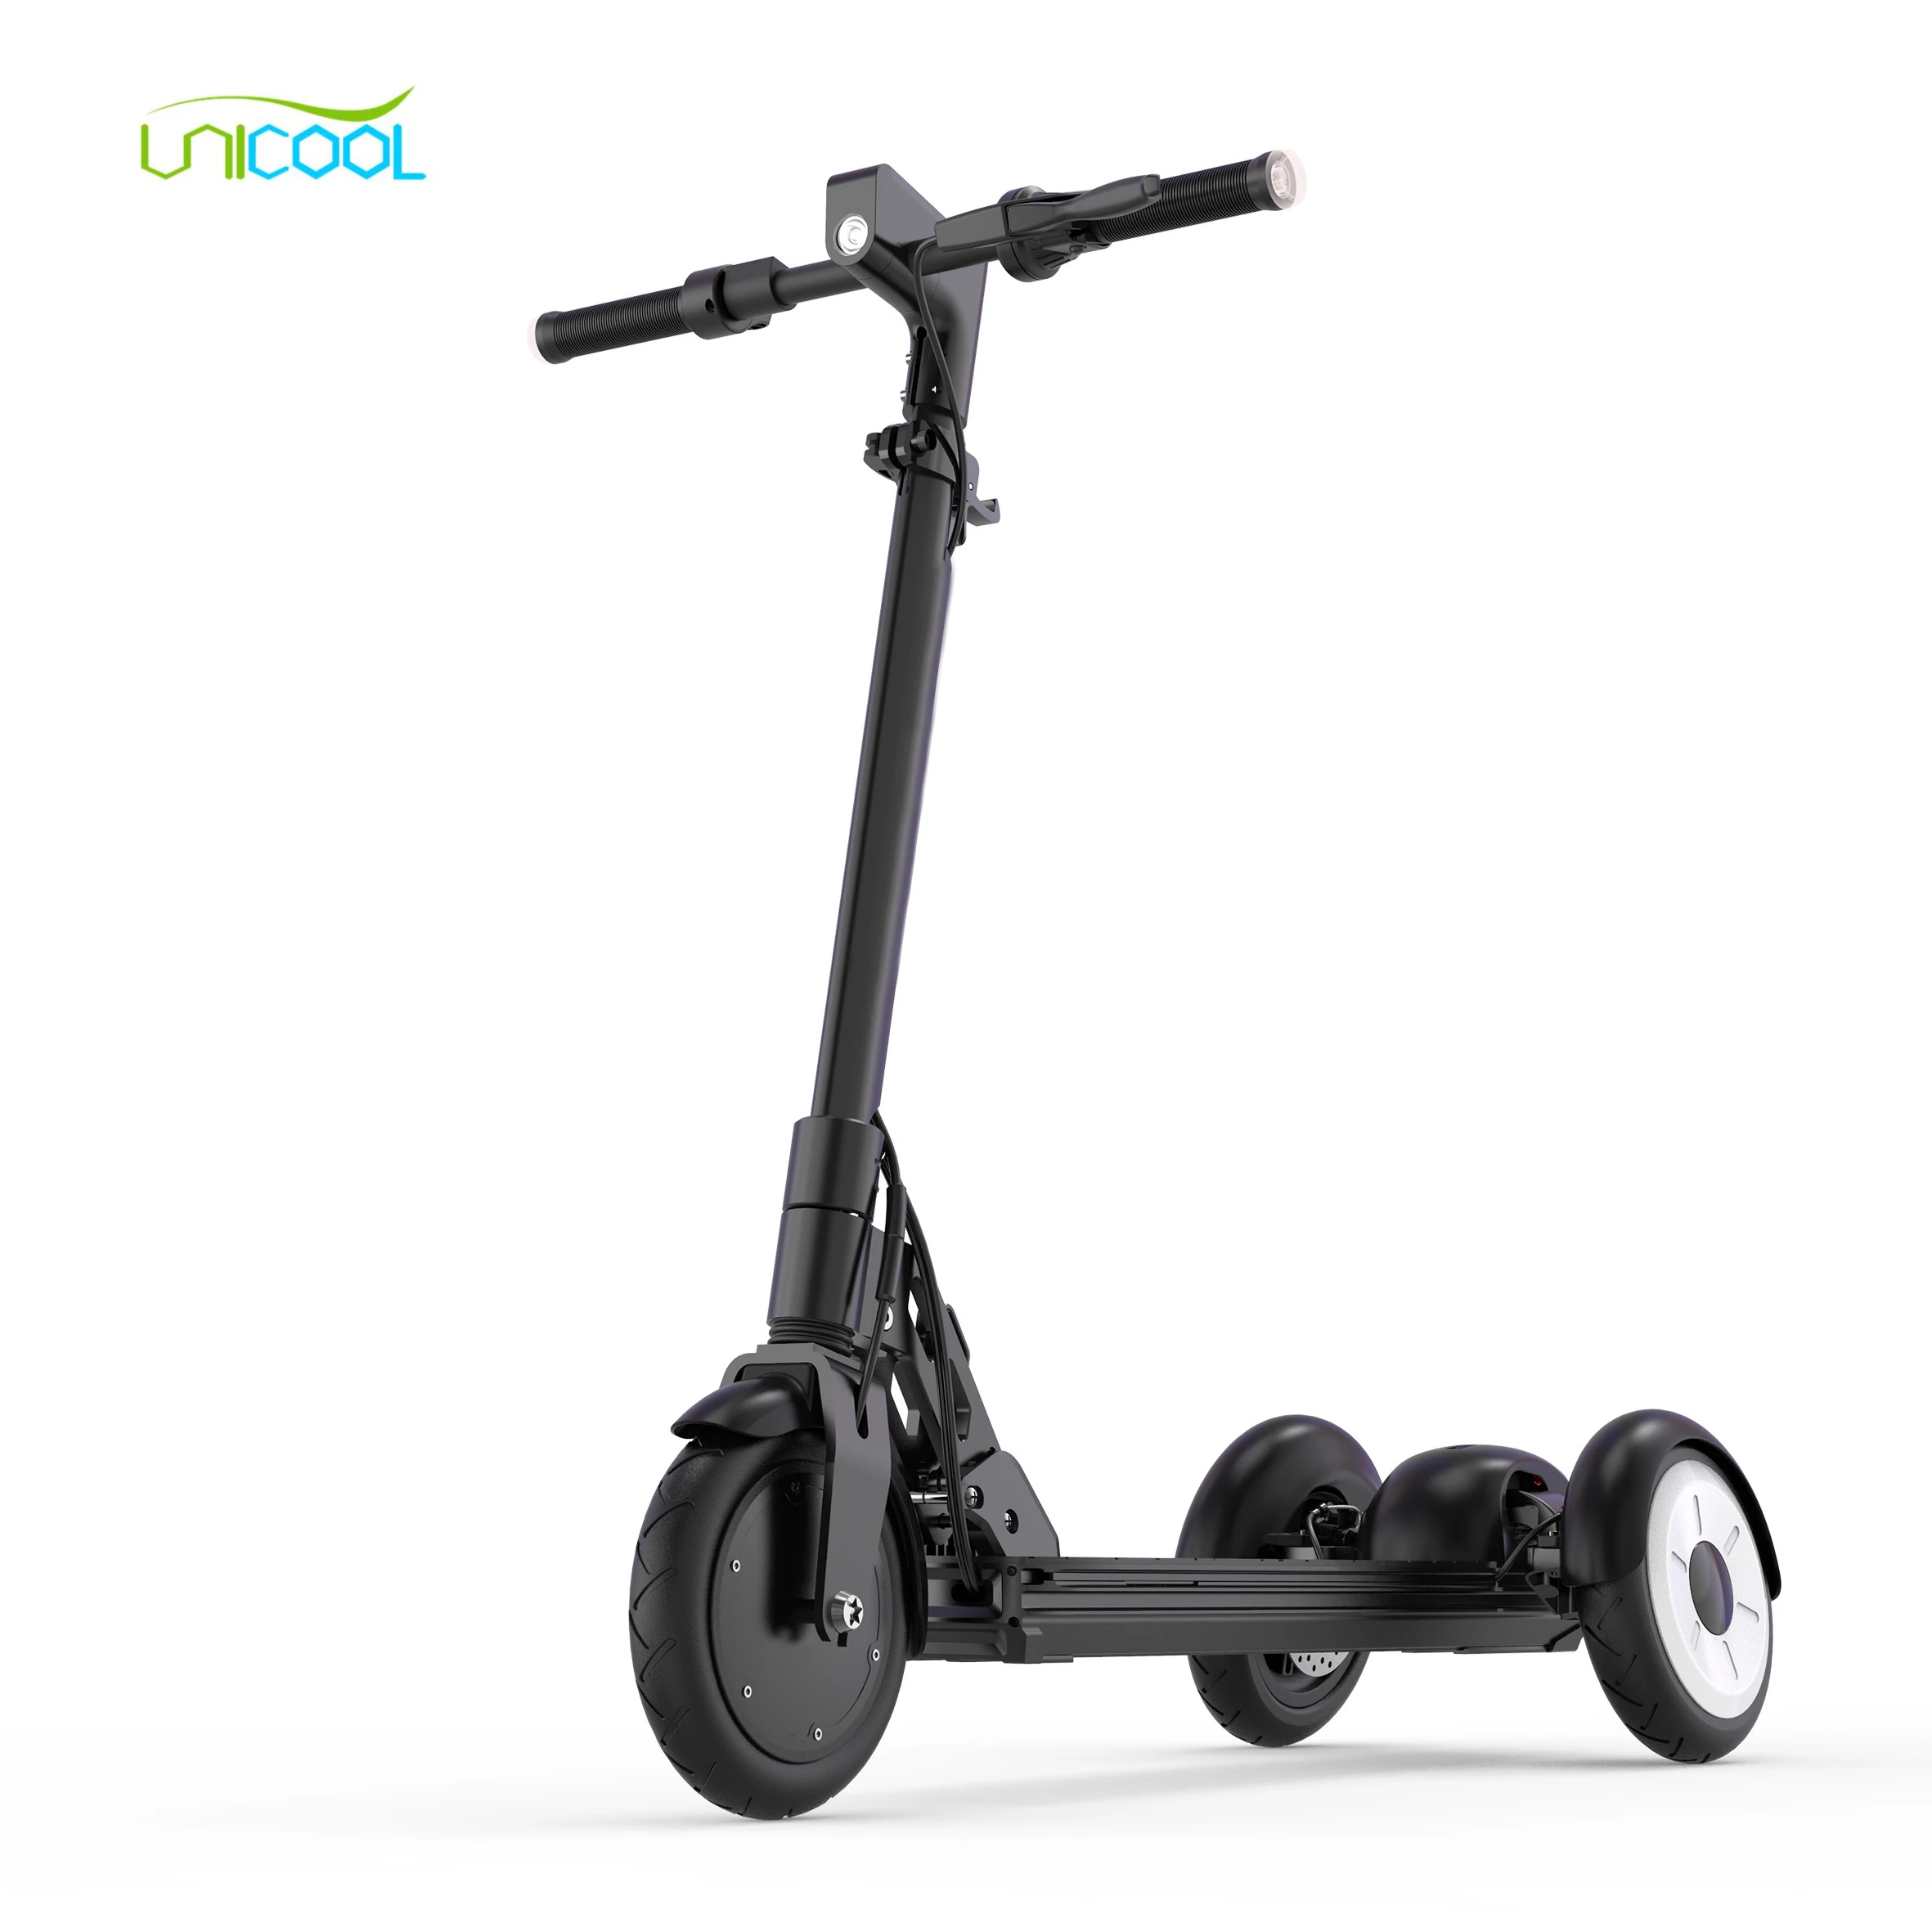 

Unicool scooter electrique 3 roues adulte 36v 350w 3wheel scooter for adult with swappable battery